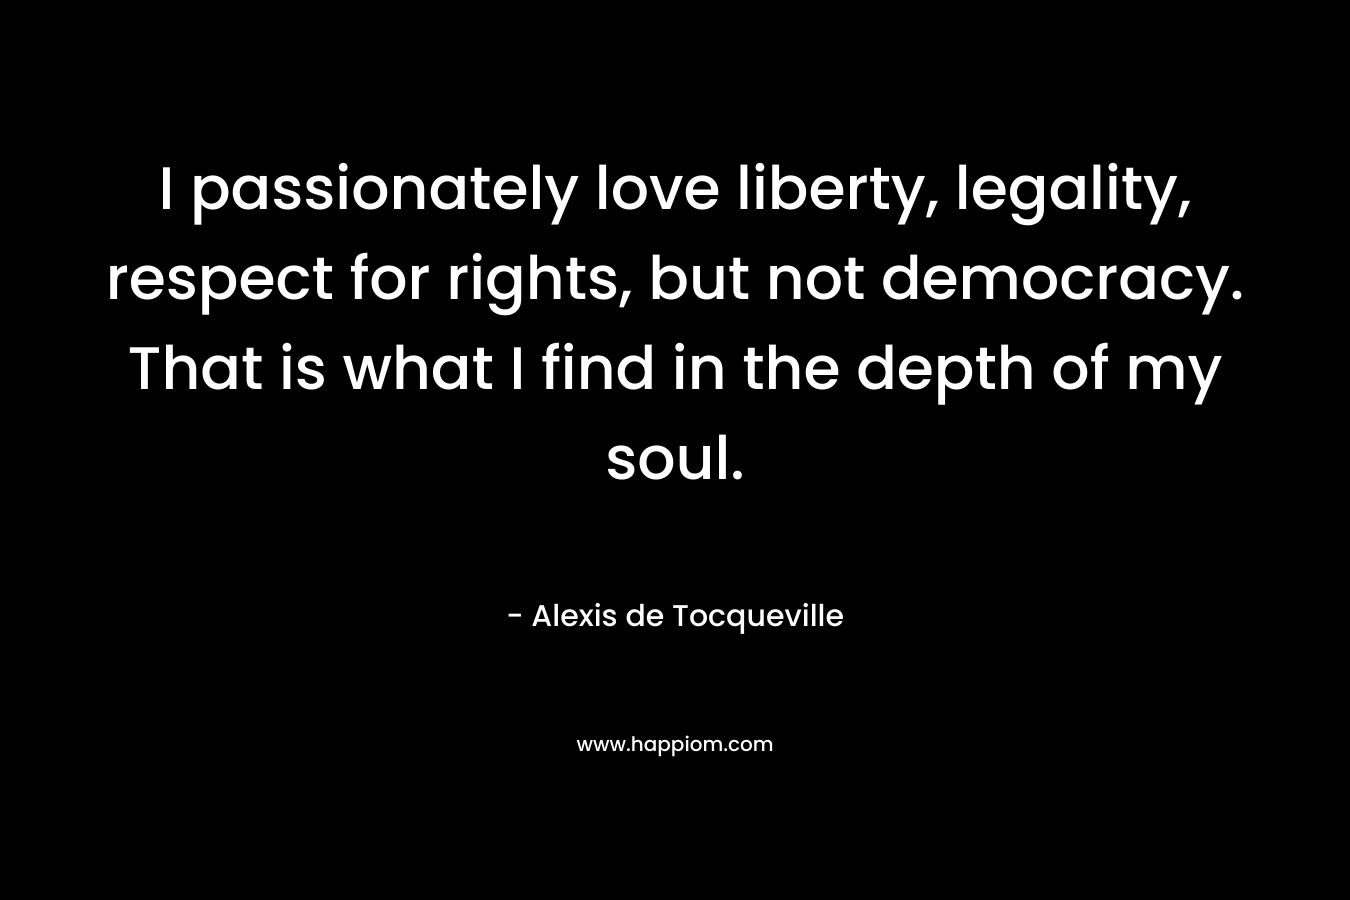 I passionately love liberty, legality, respect for rights, but not democracy. That is what I find in the depth of my soul.